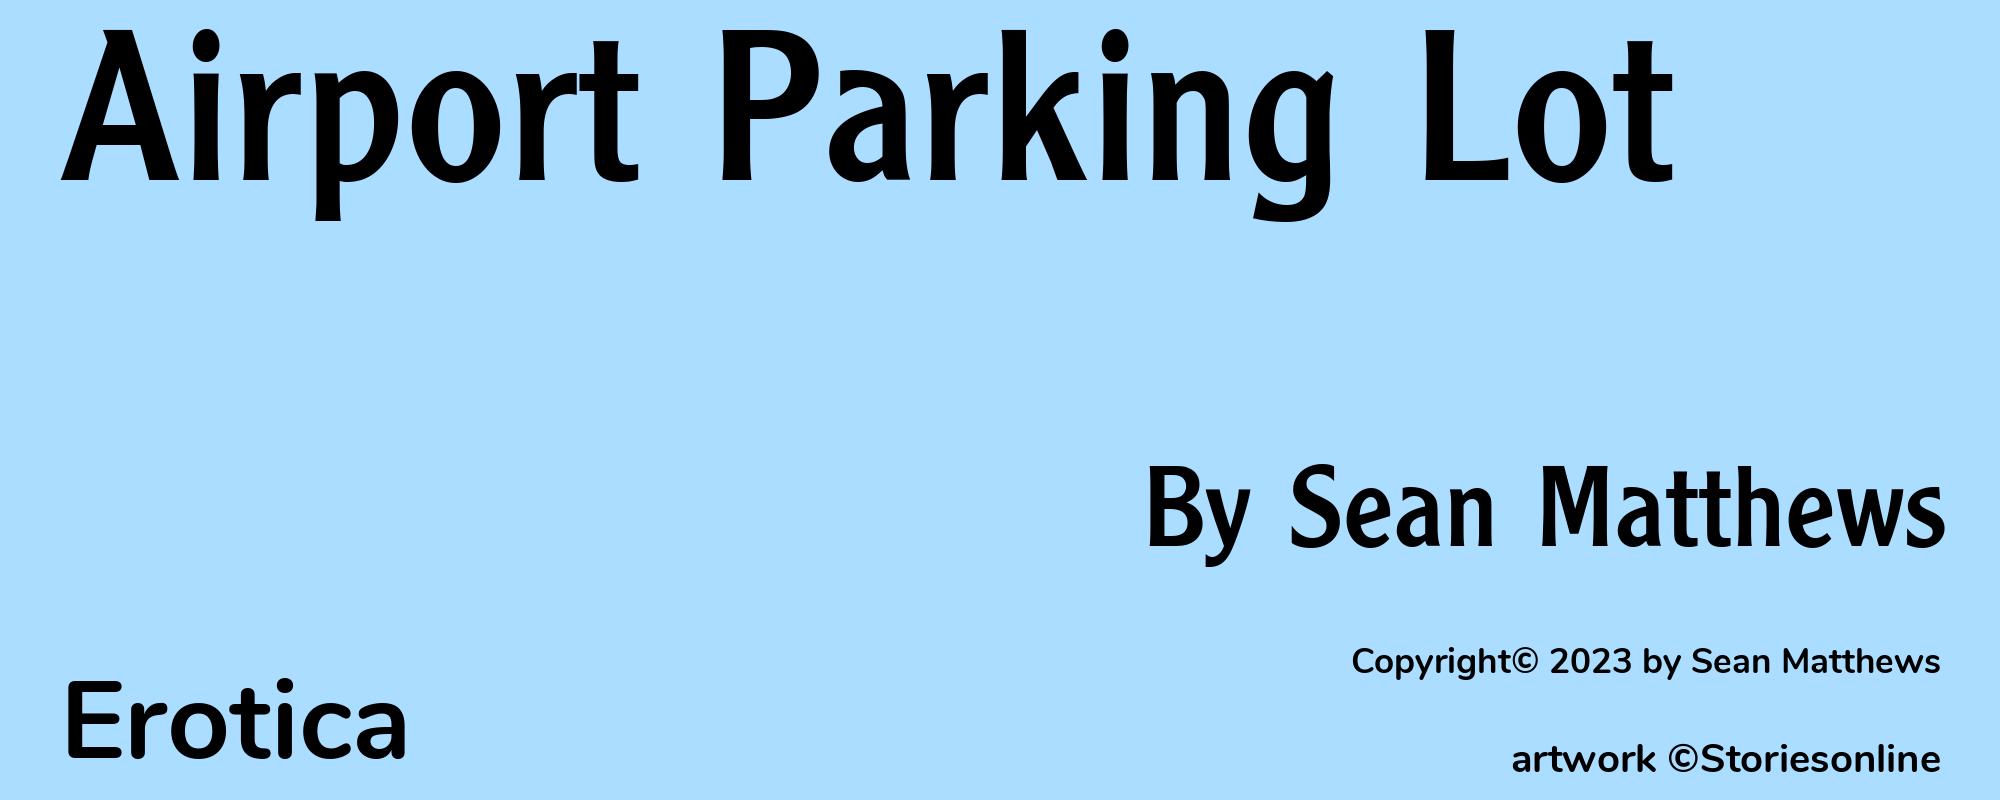 Airport Parking Lot - Cover